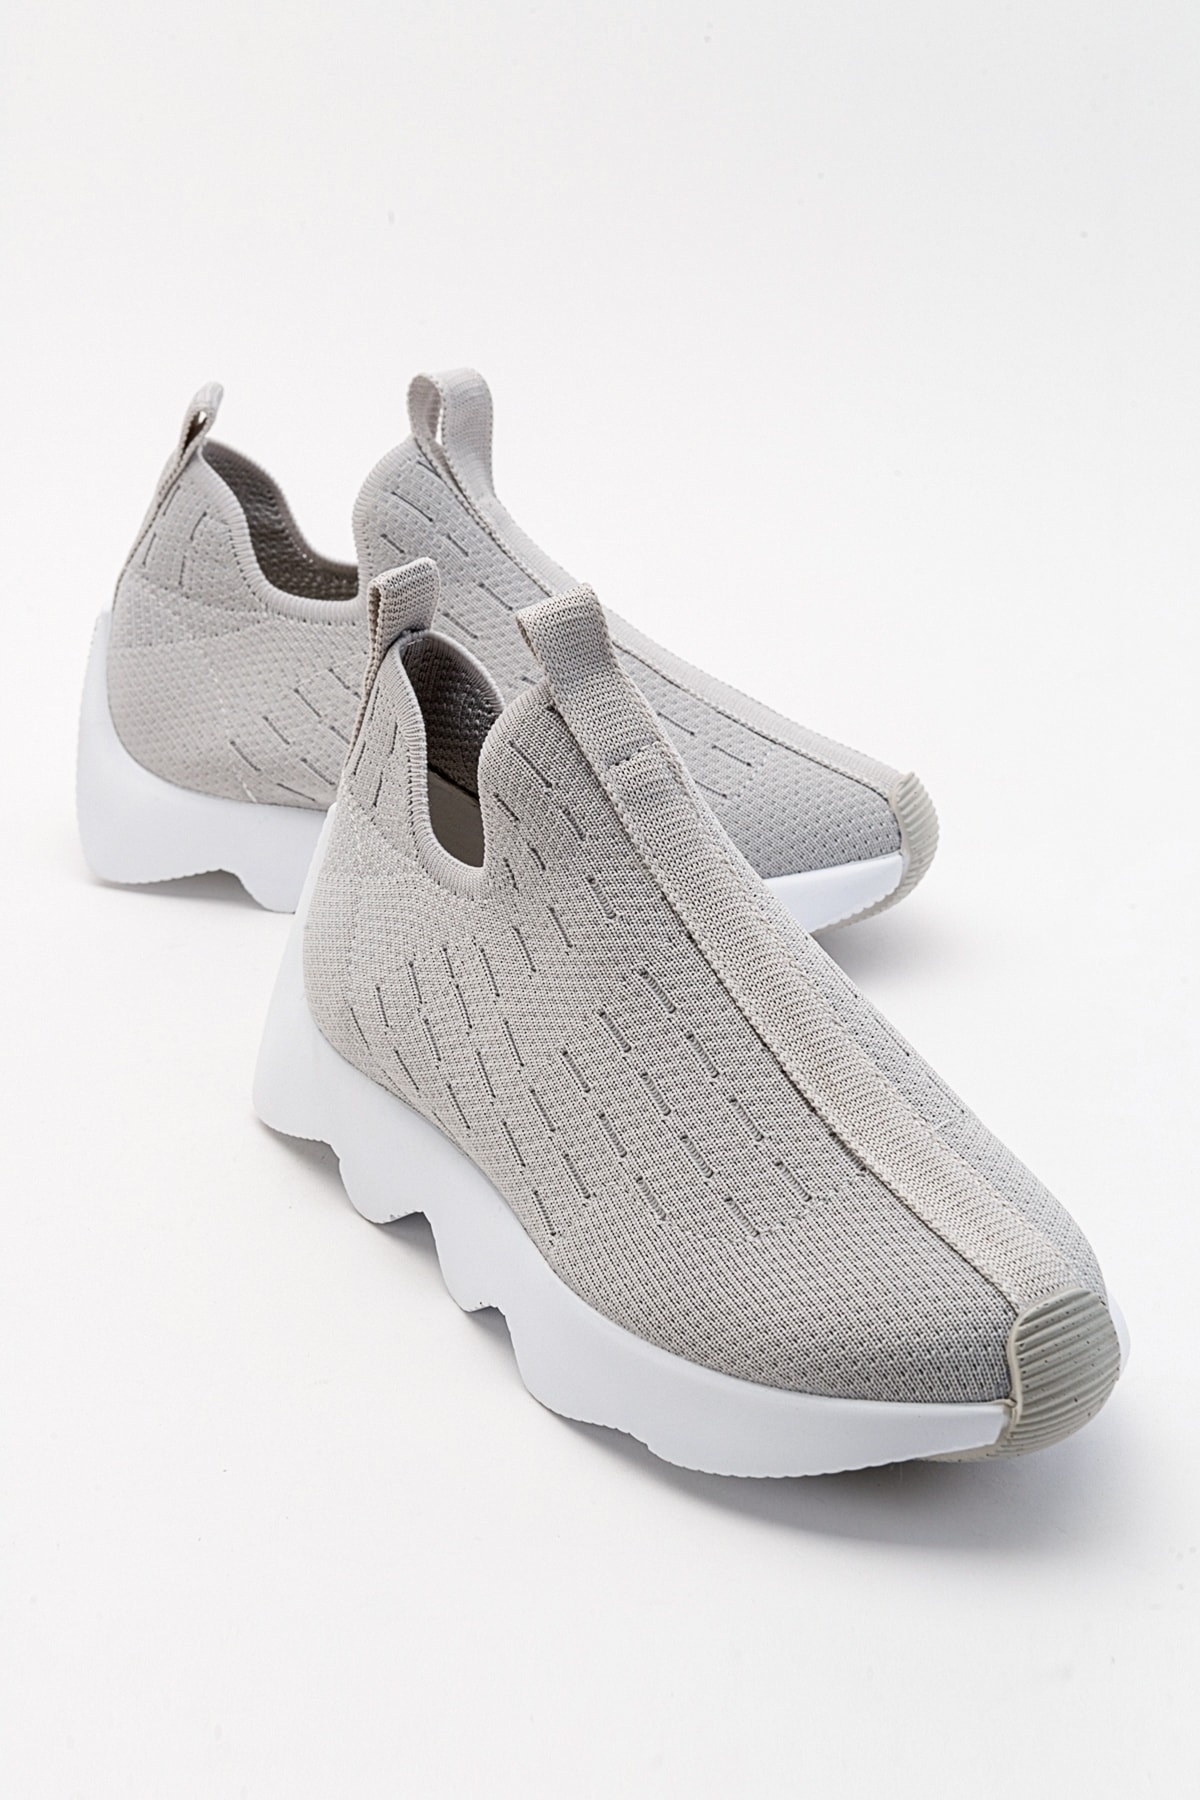 LuviShoes Bubny Gray Knitwear Women's Sports Shoes